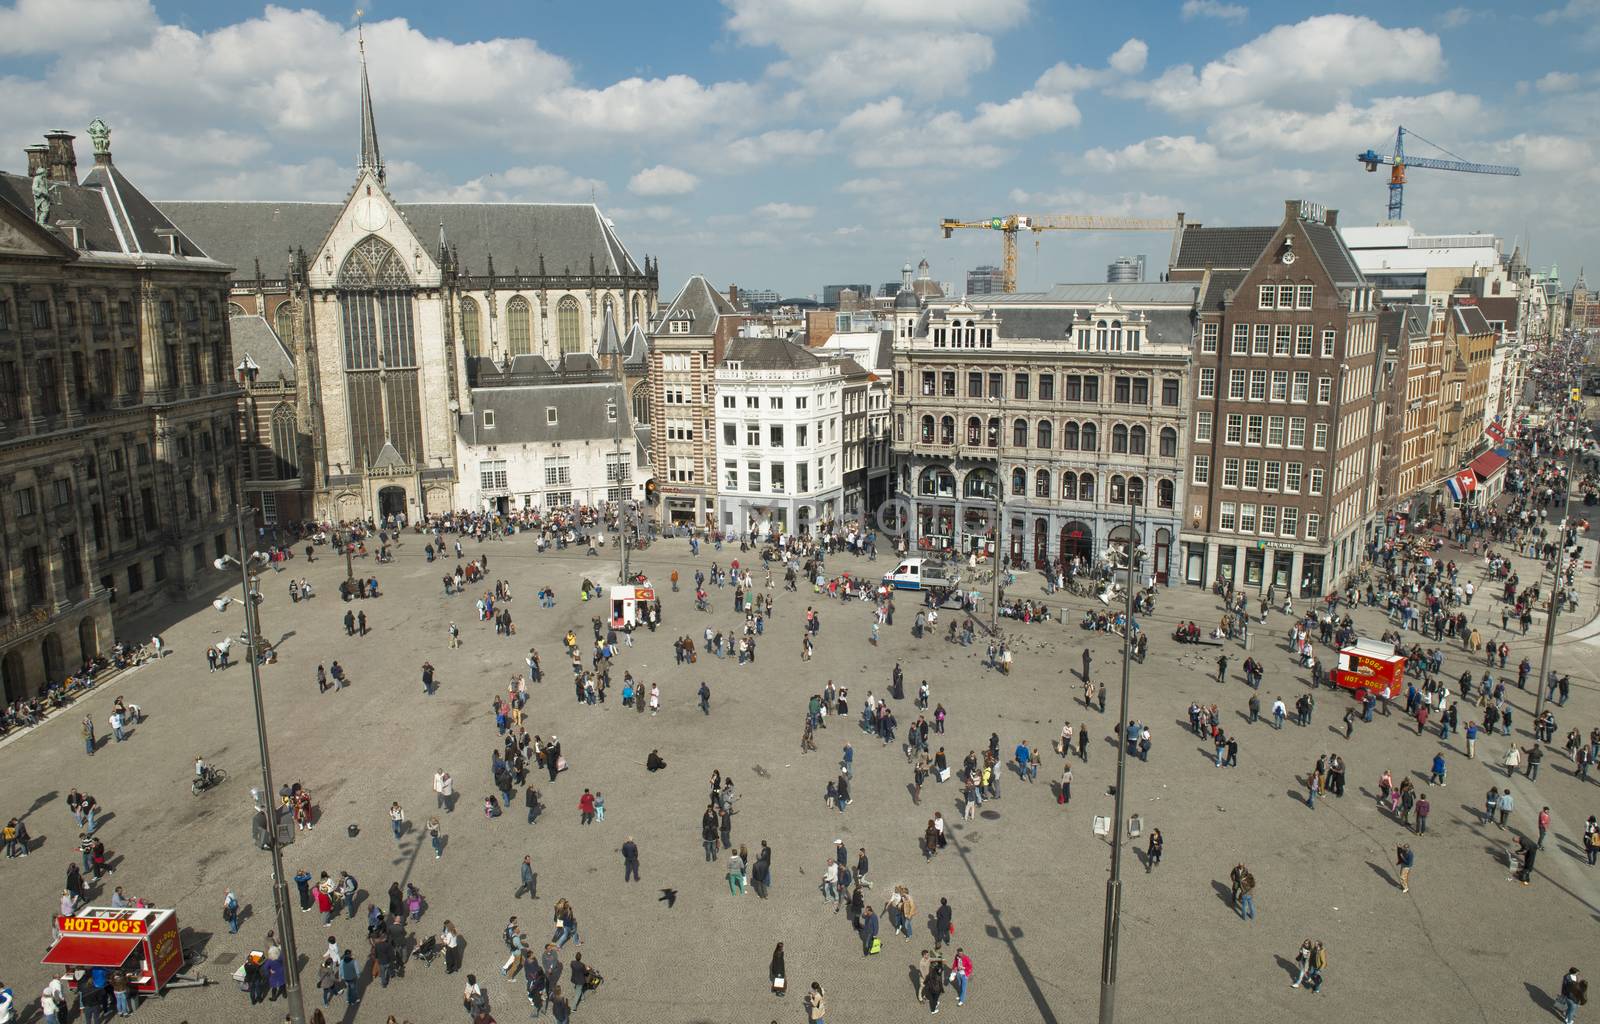 Amsterdam, The Netherlands - April 05, 2014; The Dam square is the very centre and heart of Amsterdam and has seen many historical dramas. The big attractions in Dam Square, Royal Palace.  Although no longer home to the Dutch Royal family, this grand 17th century Royal Palace is still used to hold official receptions.